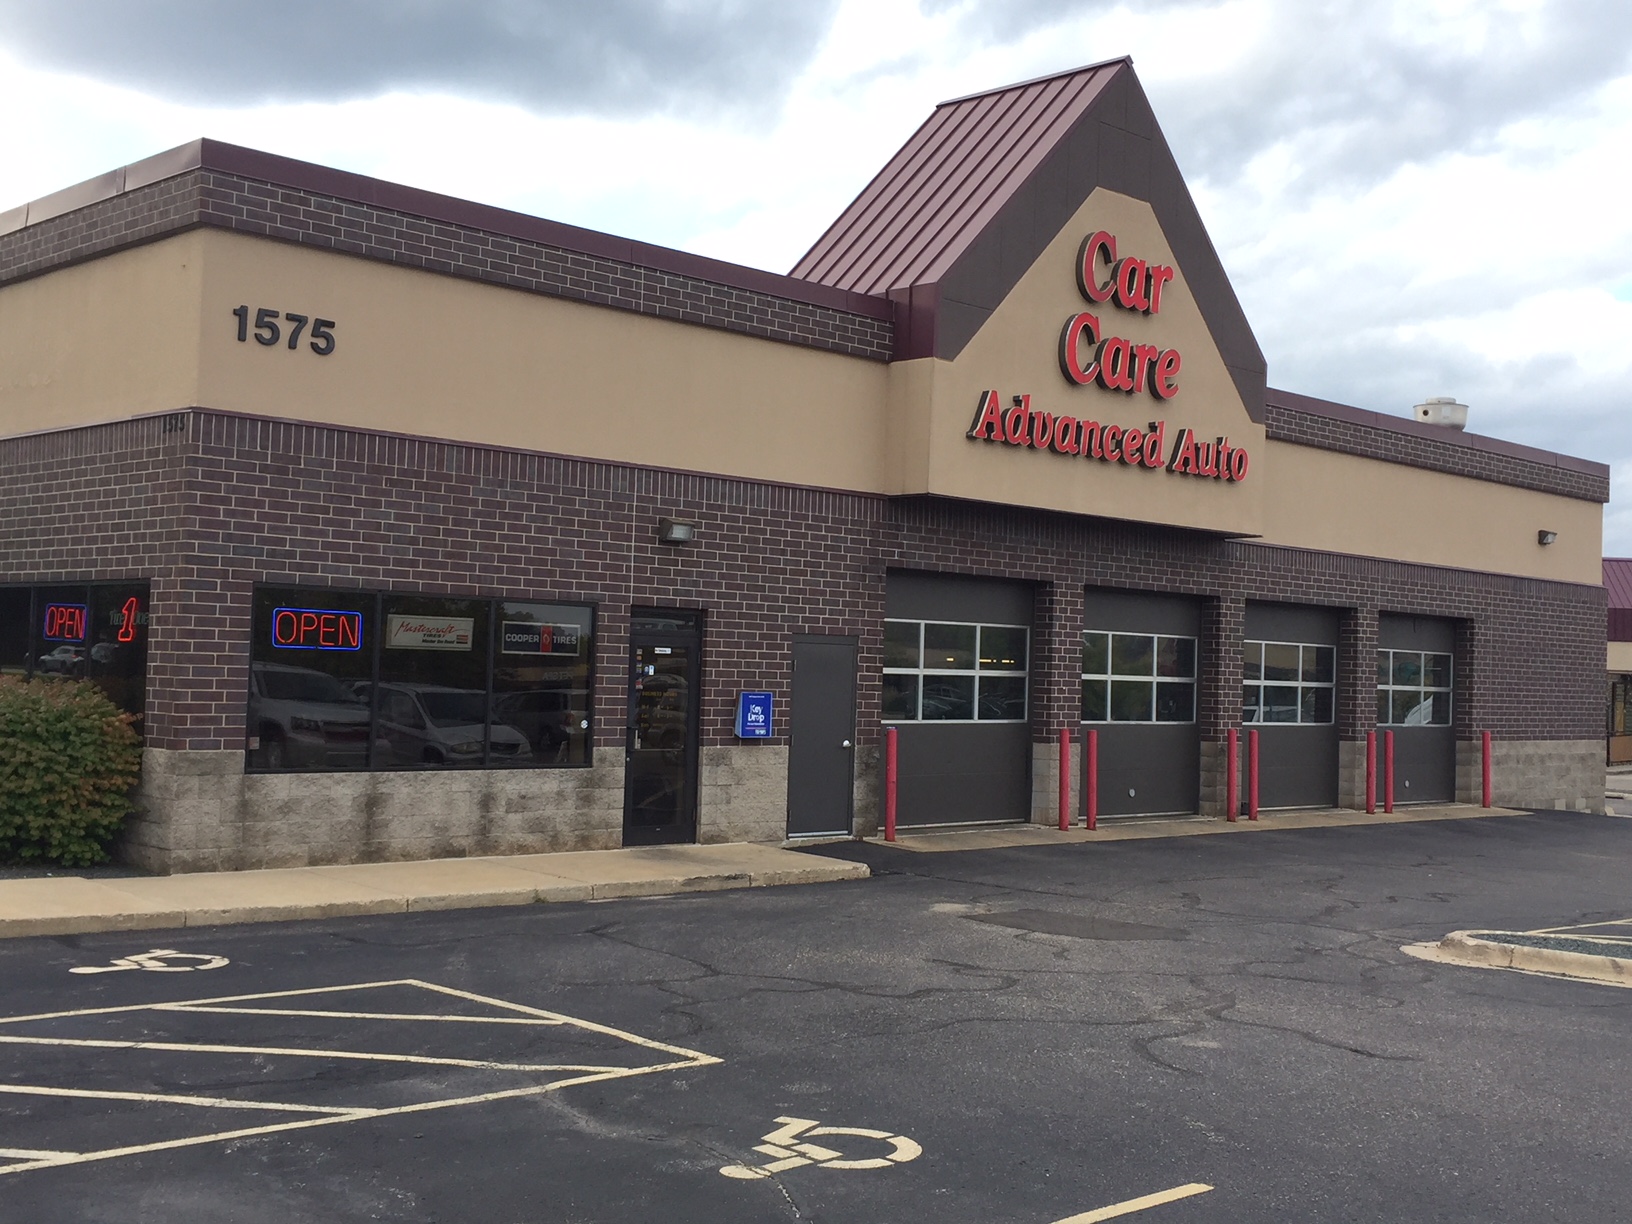 Welcome to Car Care Advanced Auto in Eagan, MN 55122